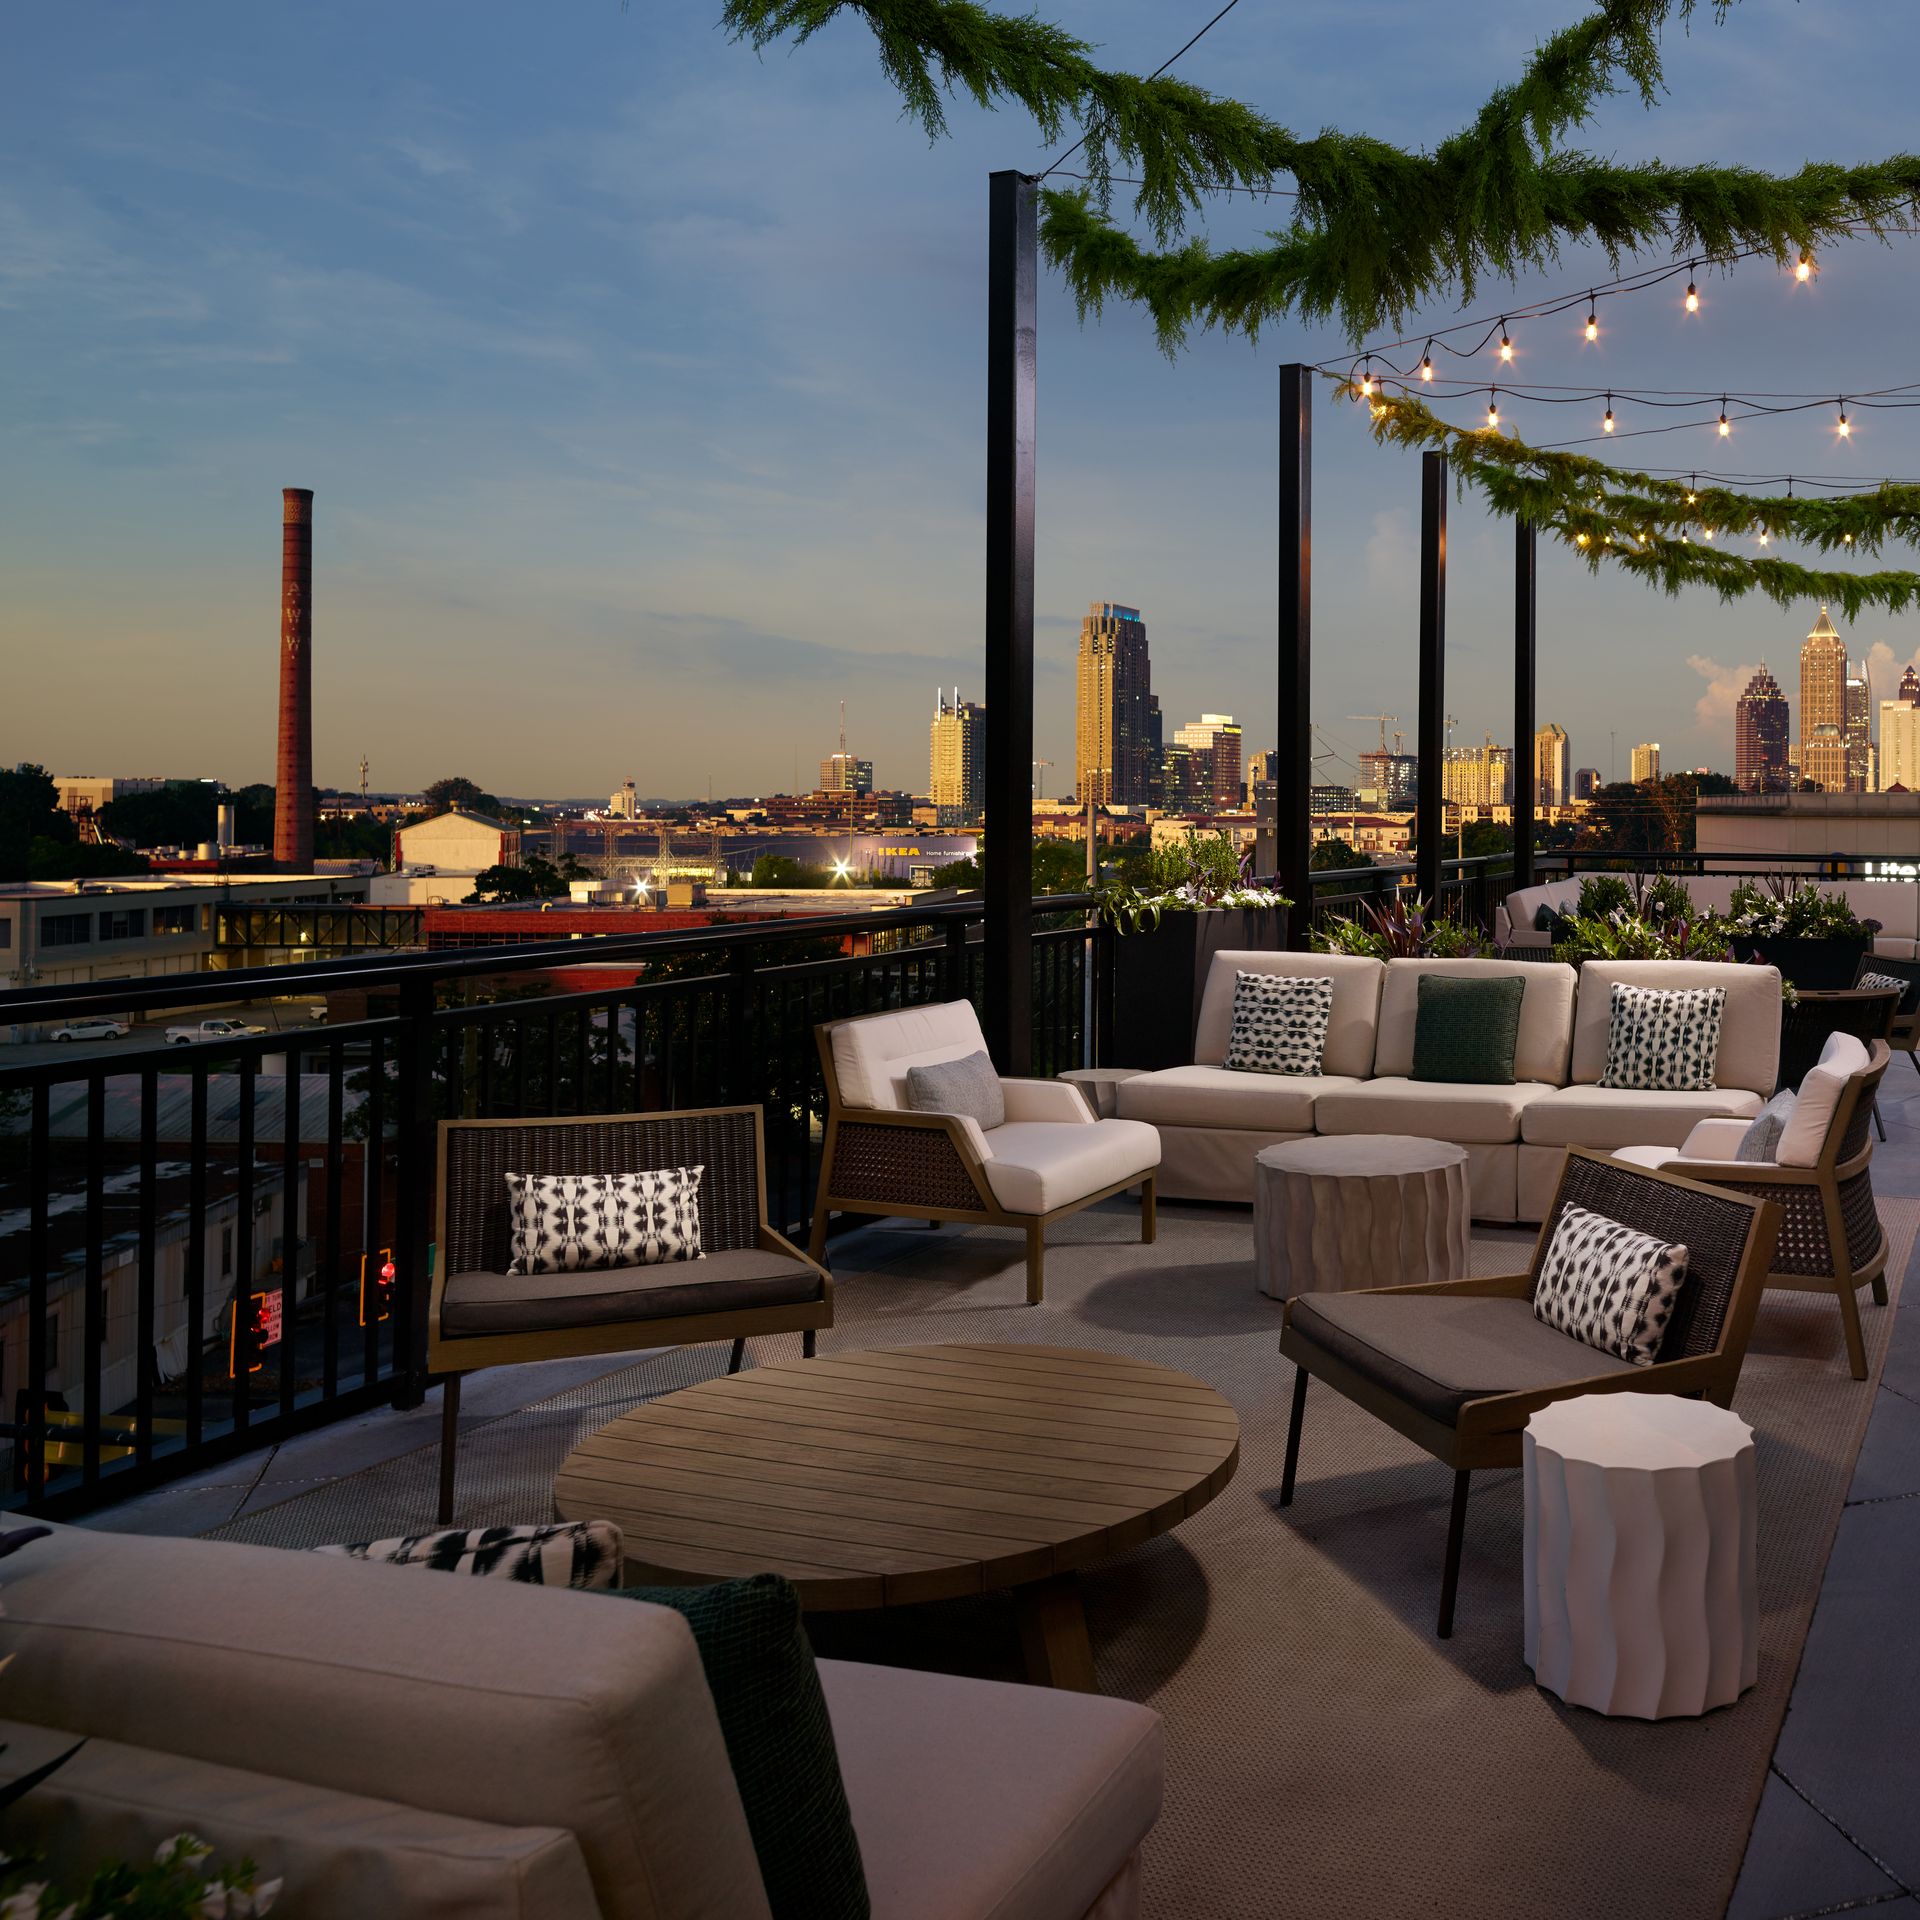 A rooftop terrace at night in front of Atlanta skyline